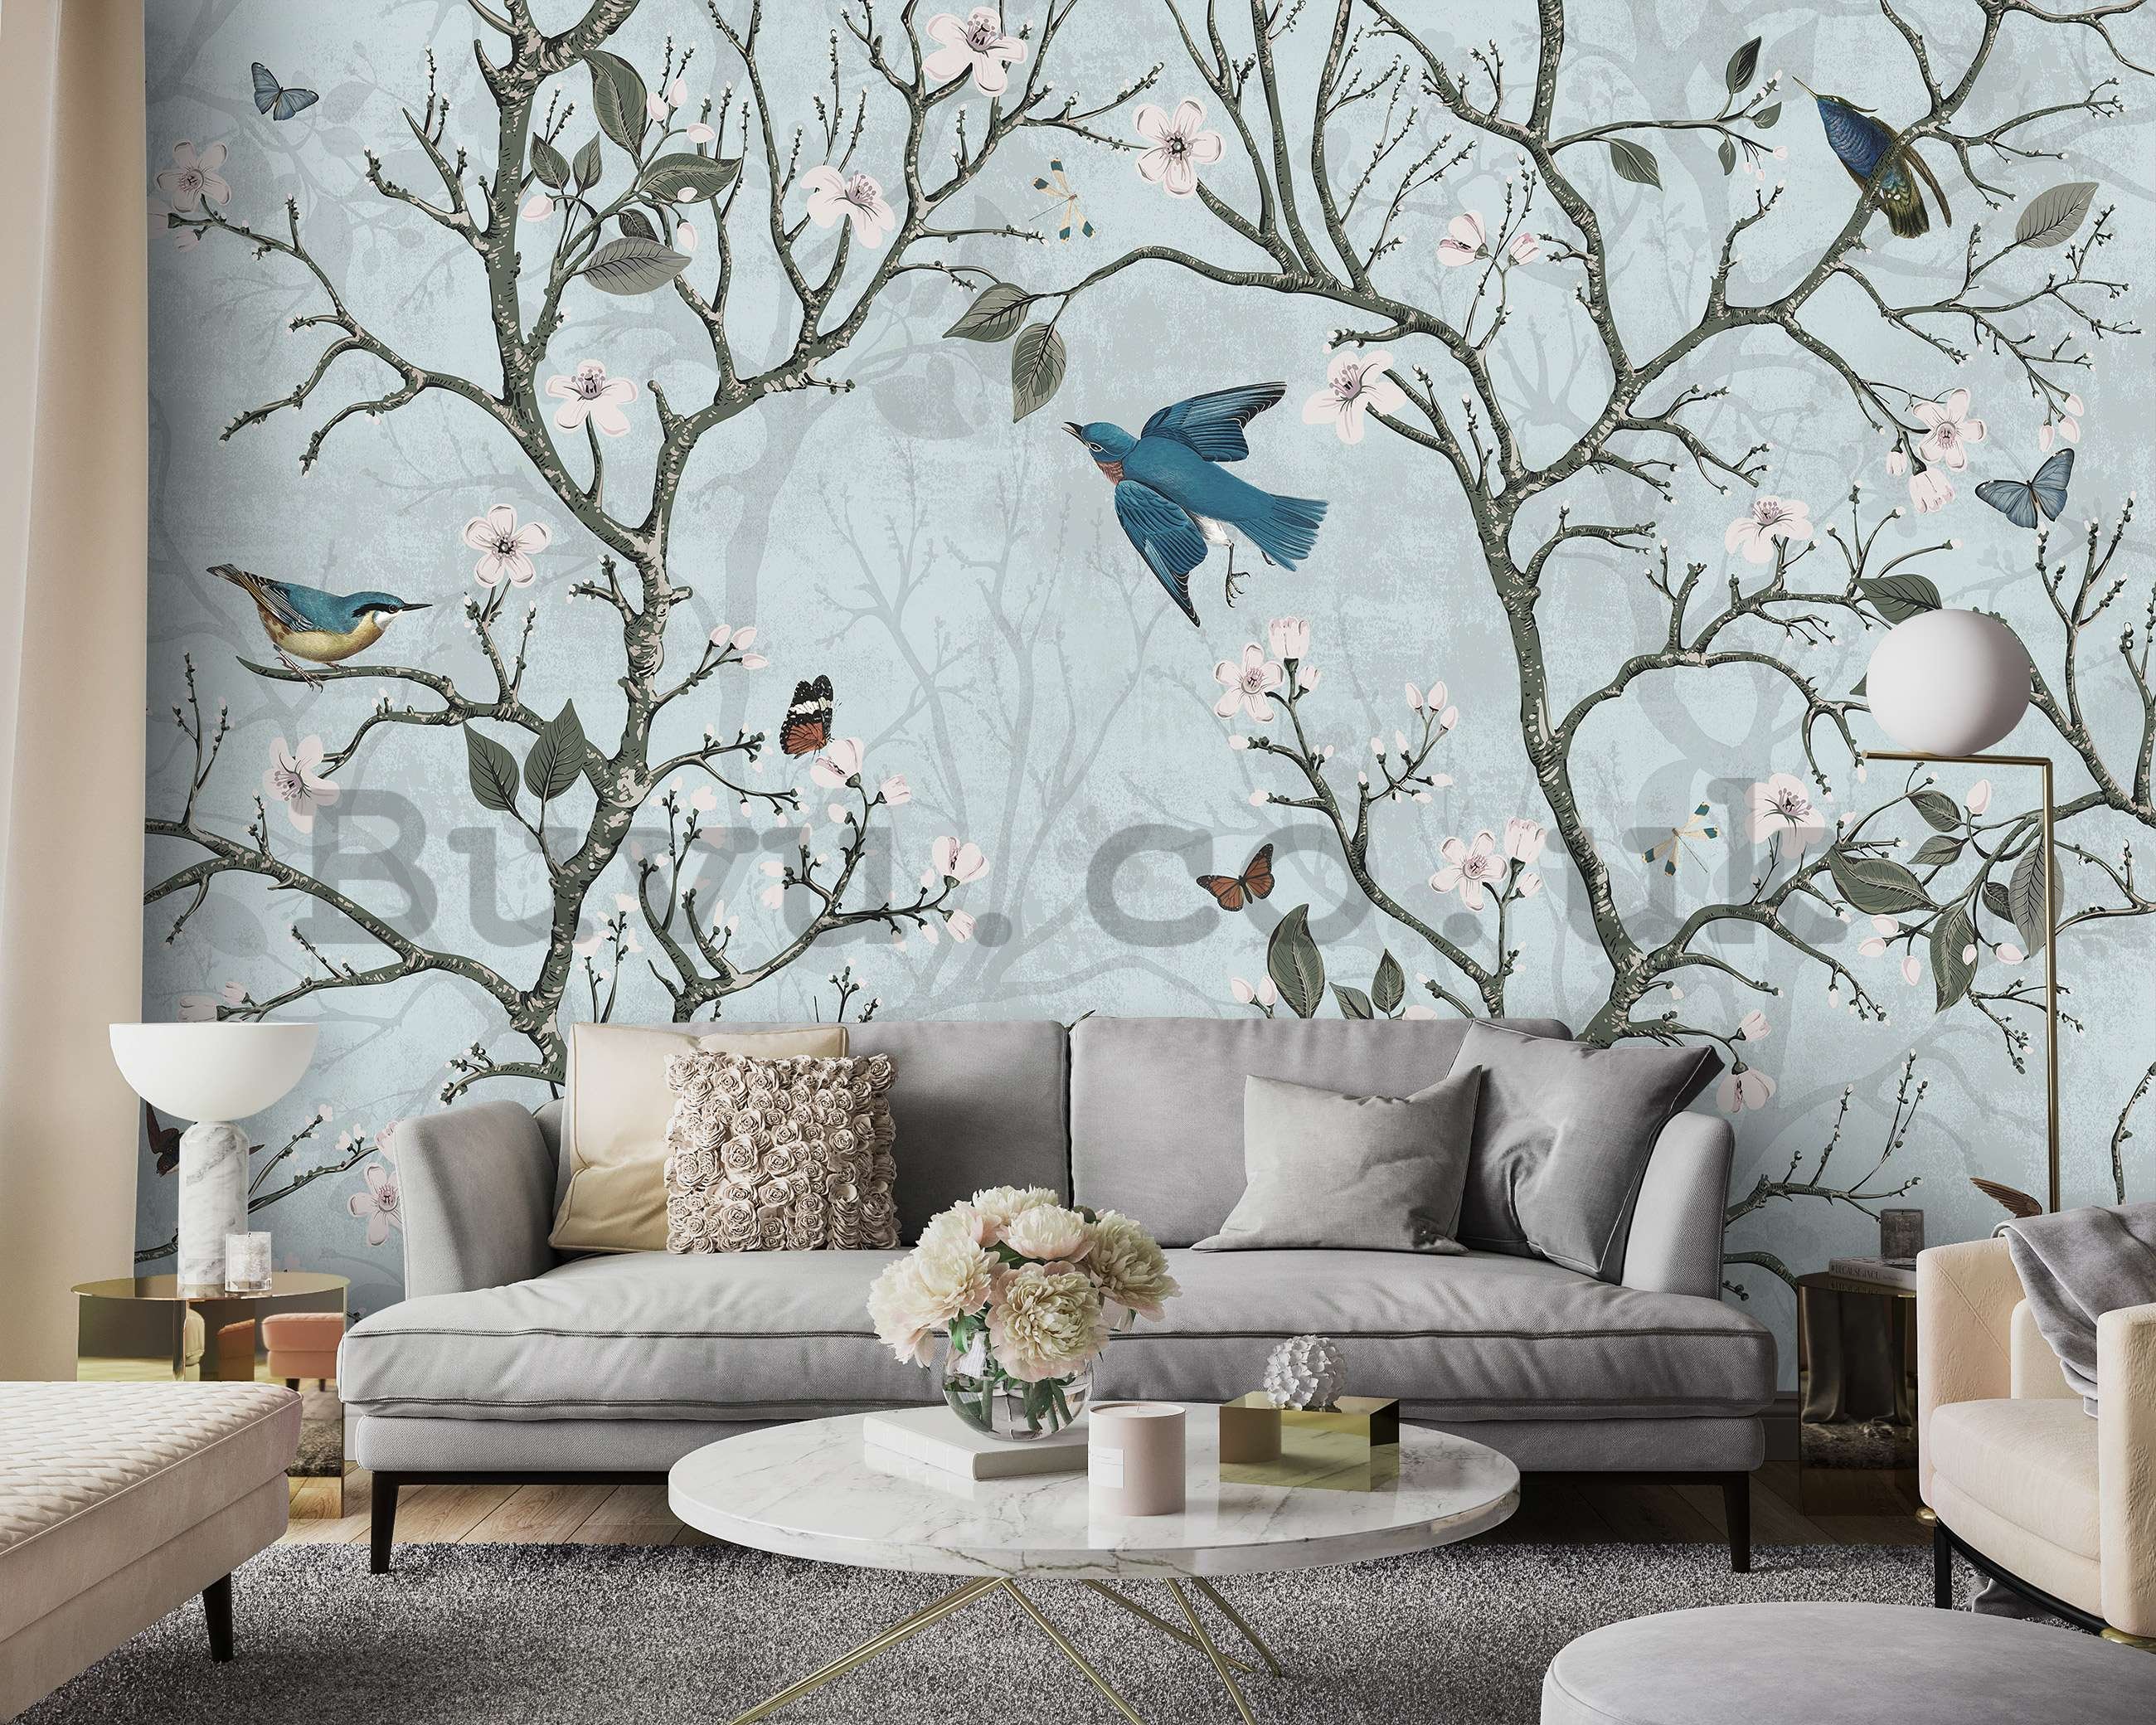 Wall mural vlies: Birds and Trees (animated) - 368x254 cm